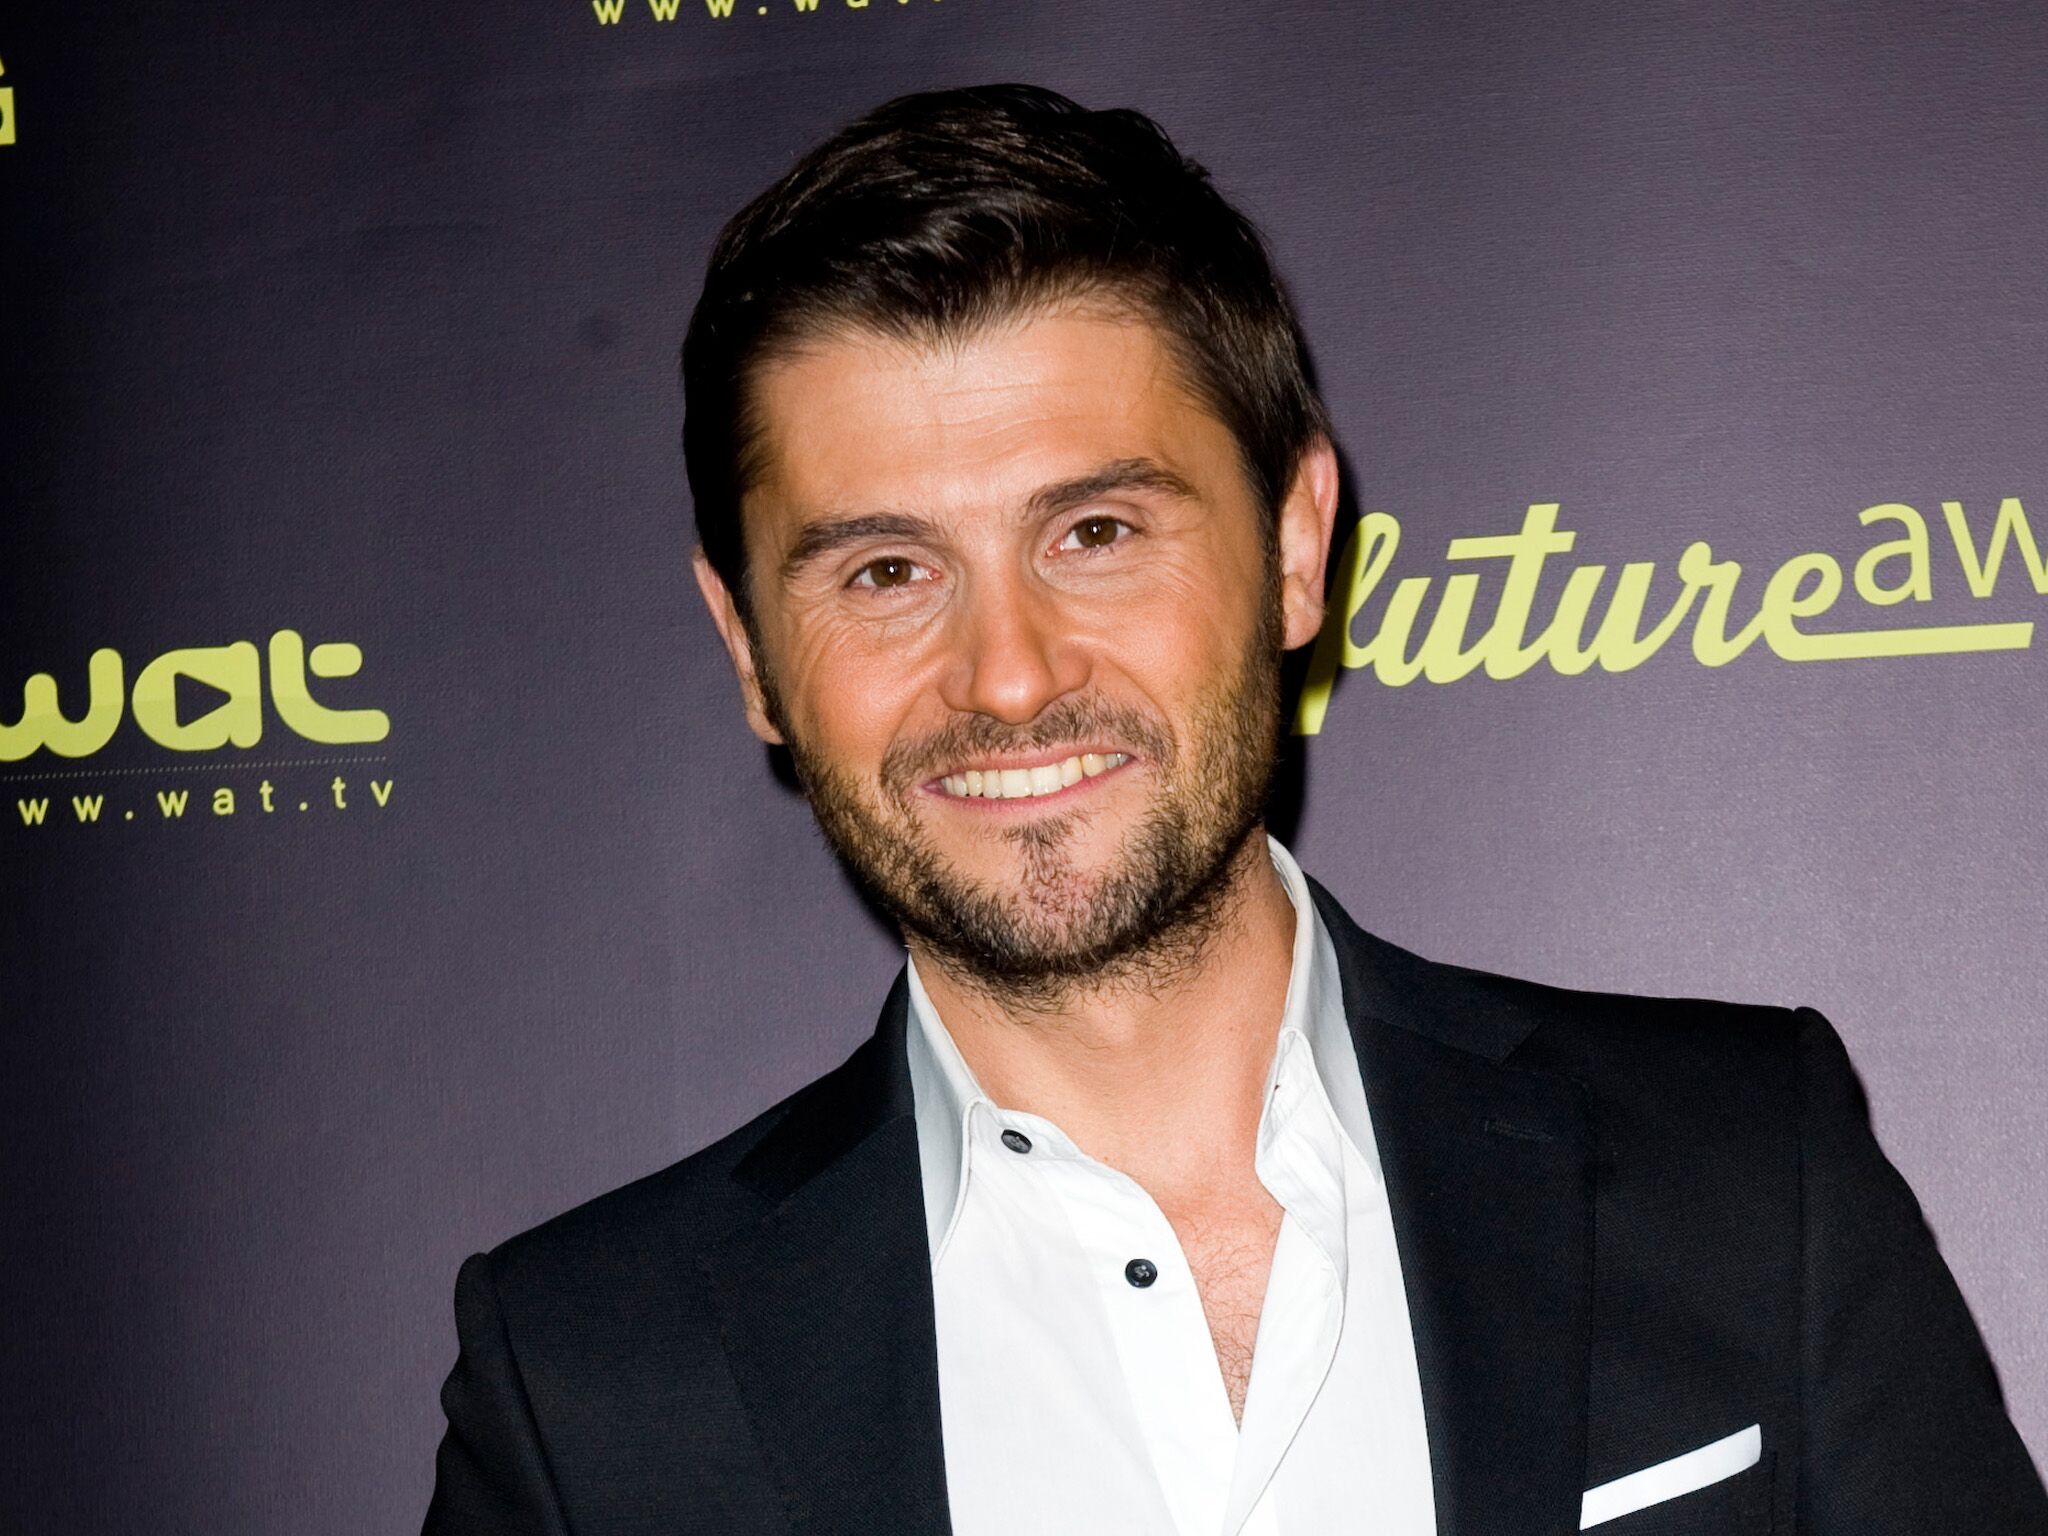 Christophe Beaugrand @DR